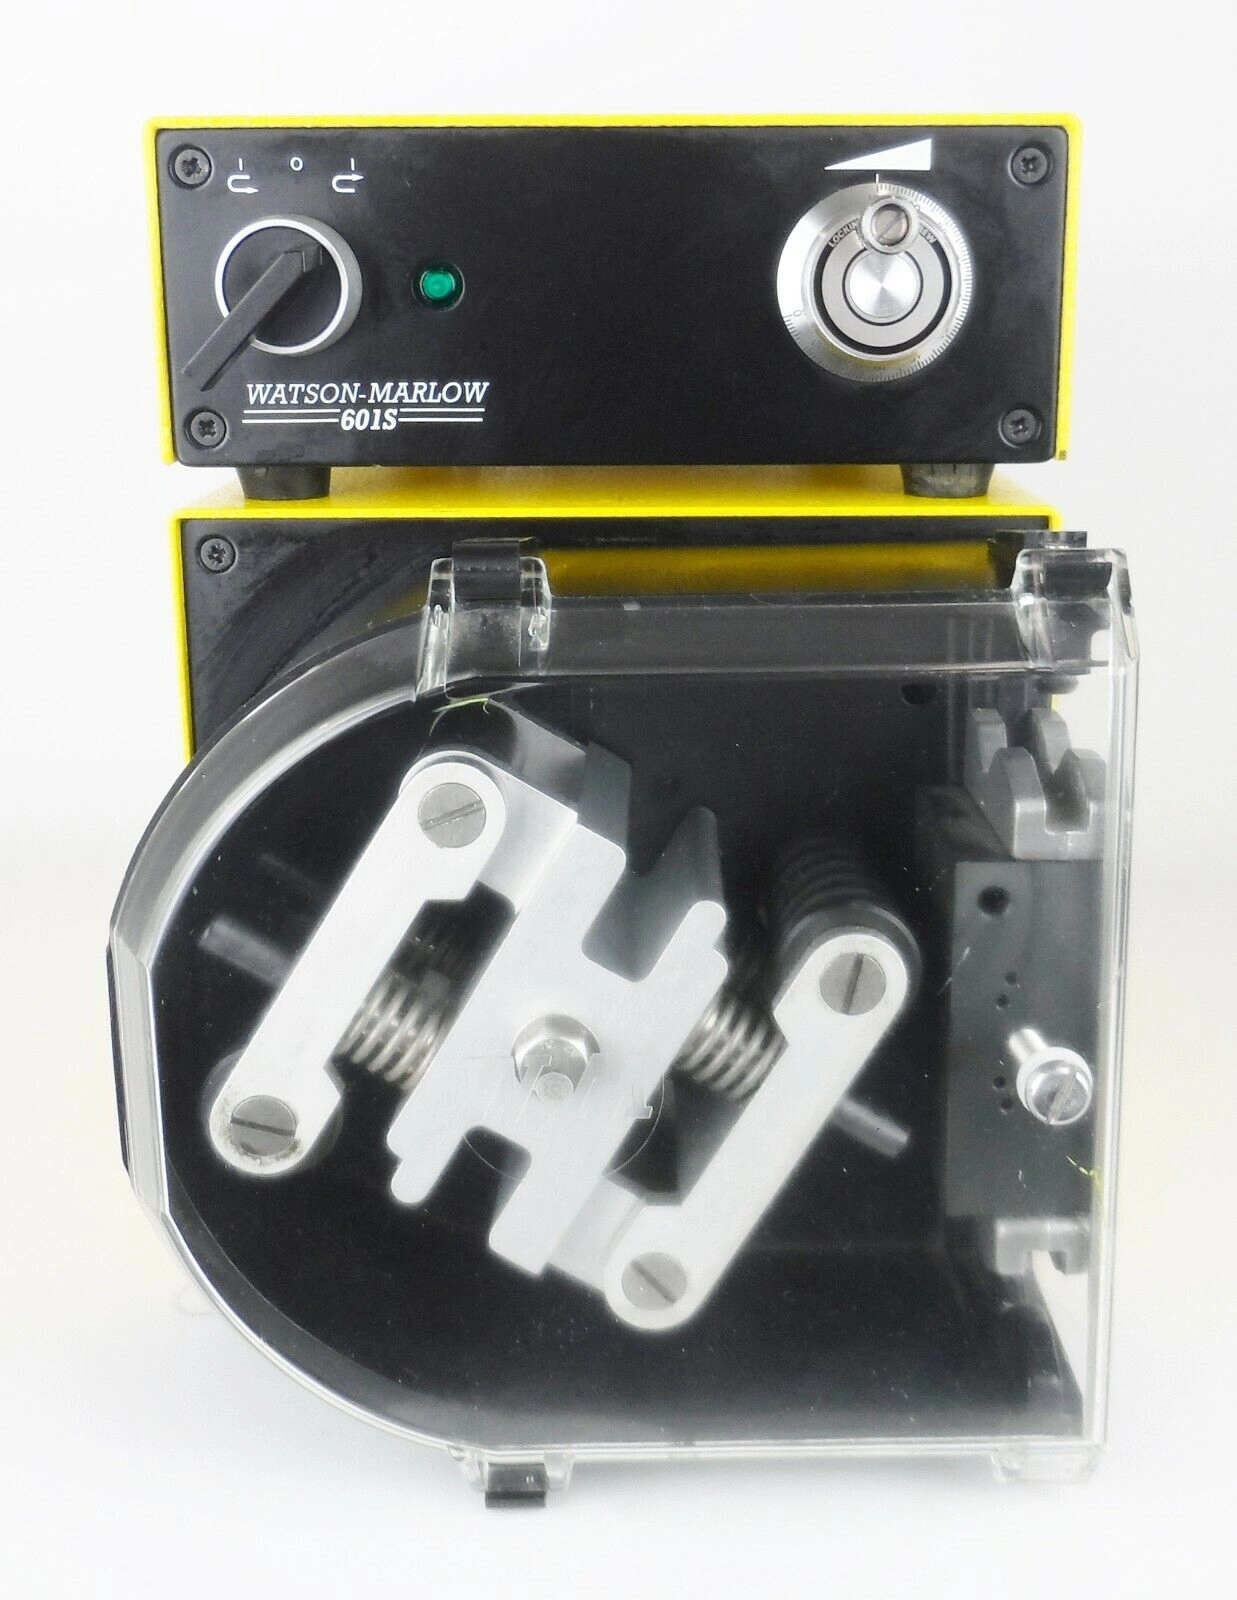 Watson Marlow 601s Peristaltic Pump and Controller